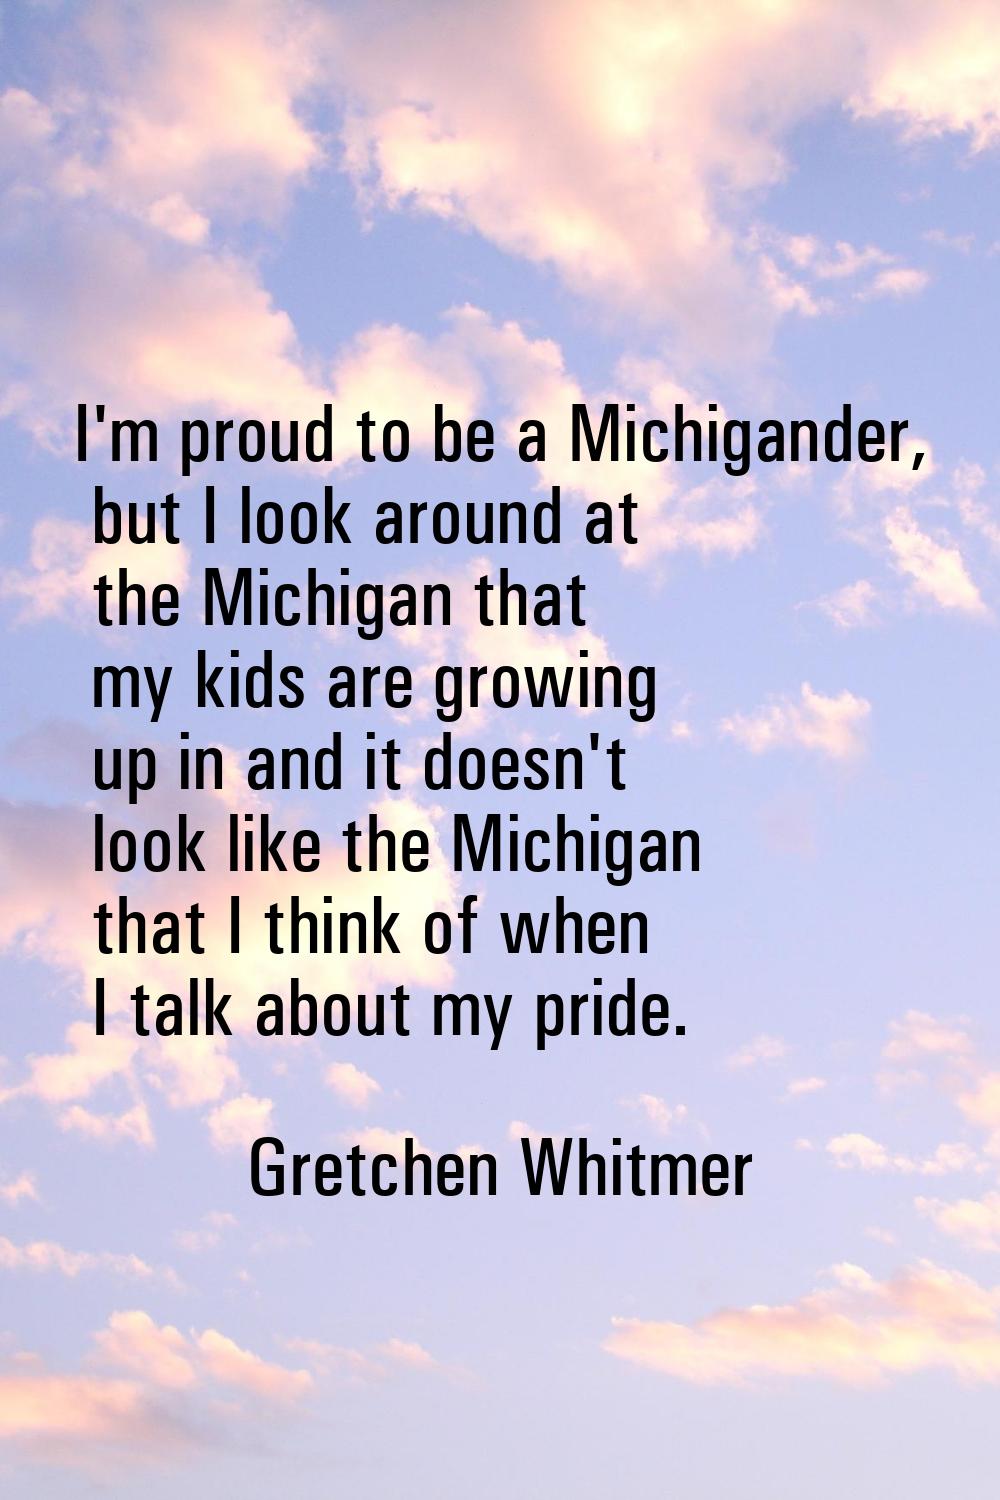 I'm proud to be a Michigander, but I look around at the Michigan that my kids are growing up in and